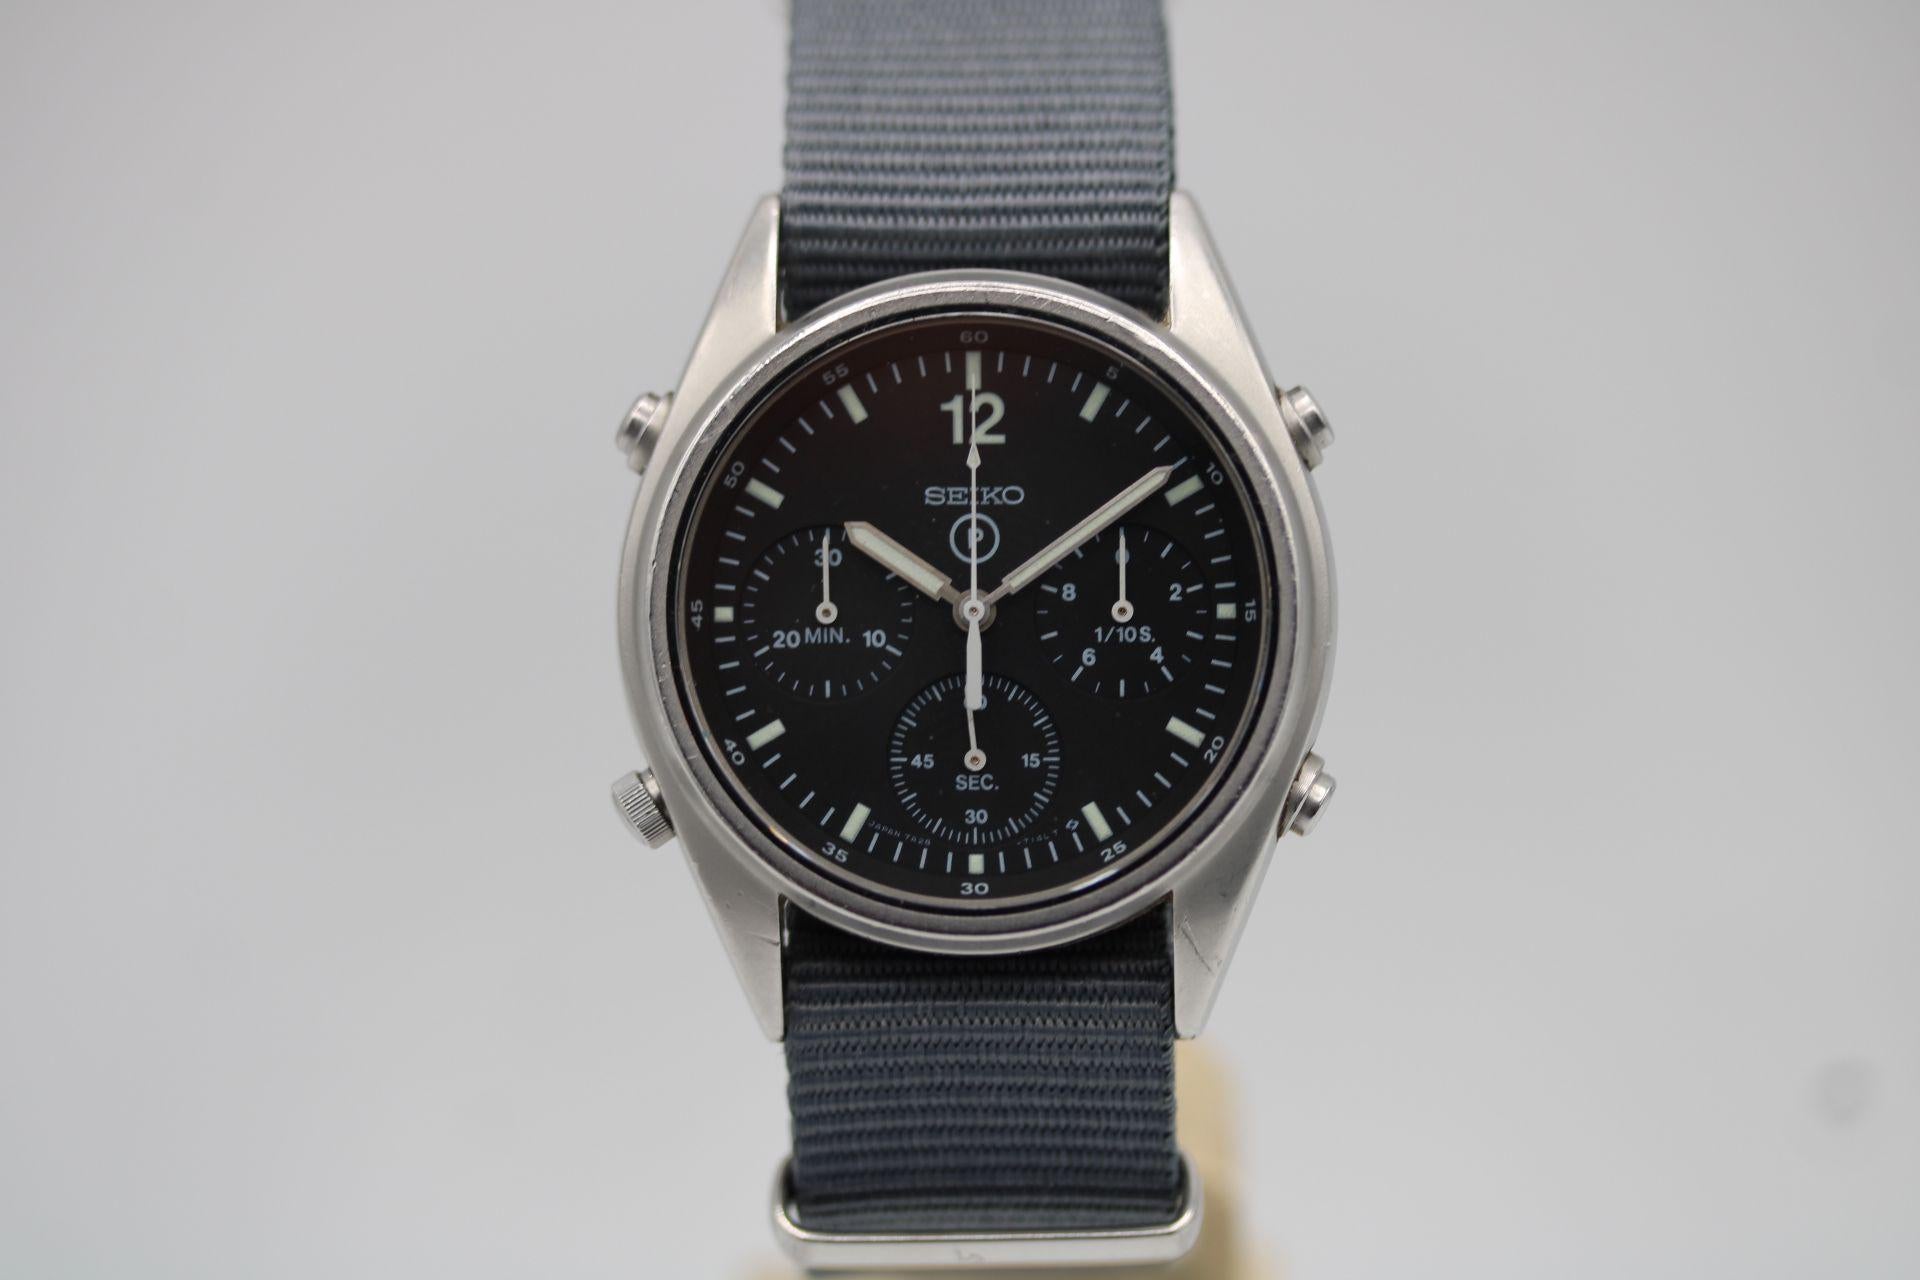 
Original, working Generation 1 Seiko Chronograph made for the British RAF in 1984. Having been used in service as a tool watch will show some signs of age and minor blemishes however all intact and with a recent battery change in fine working